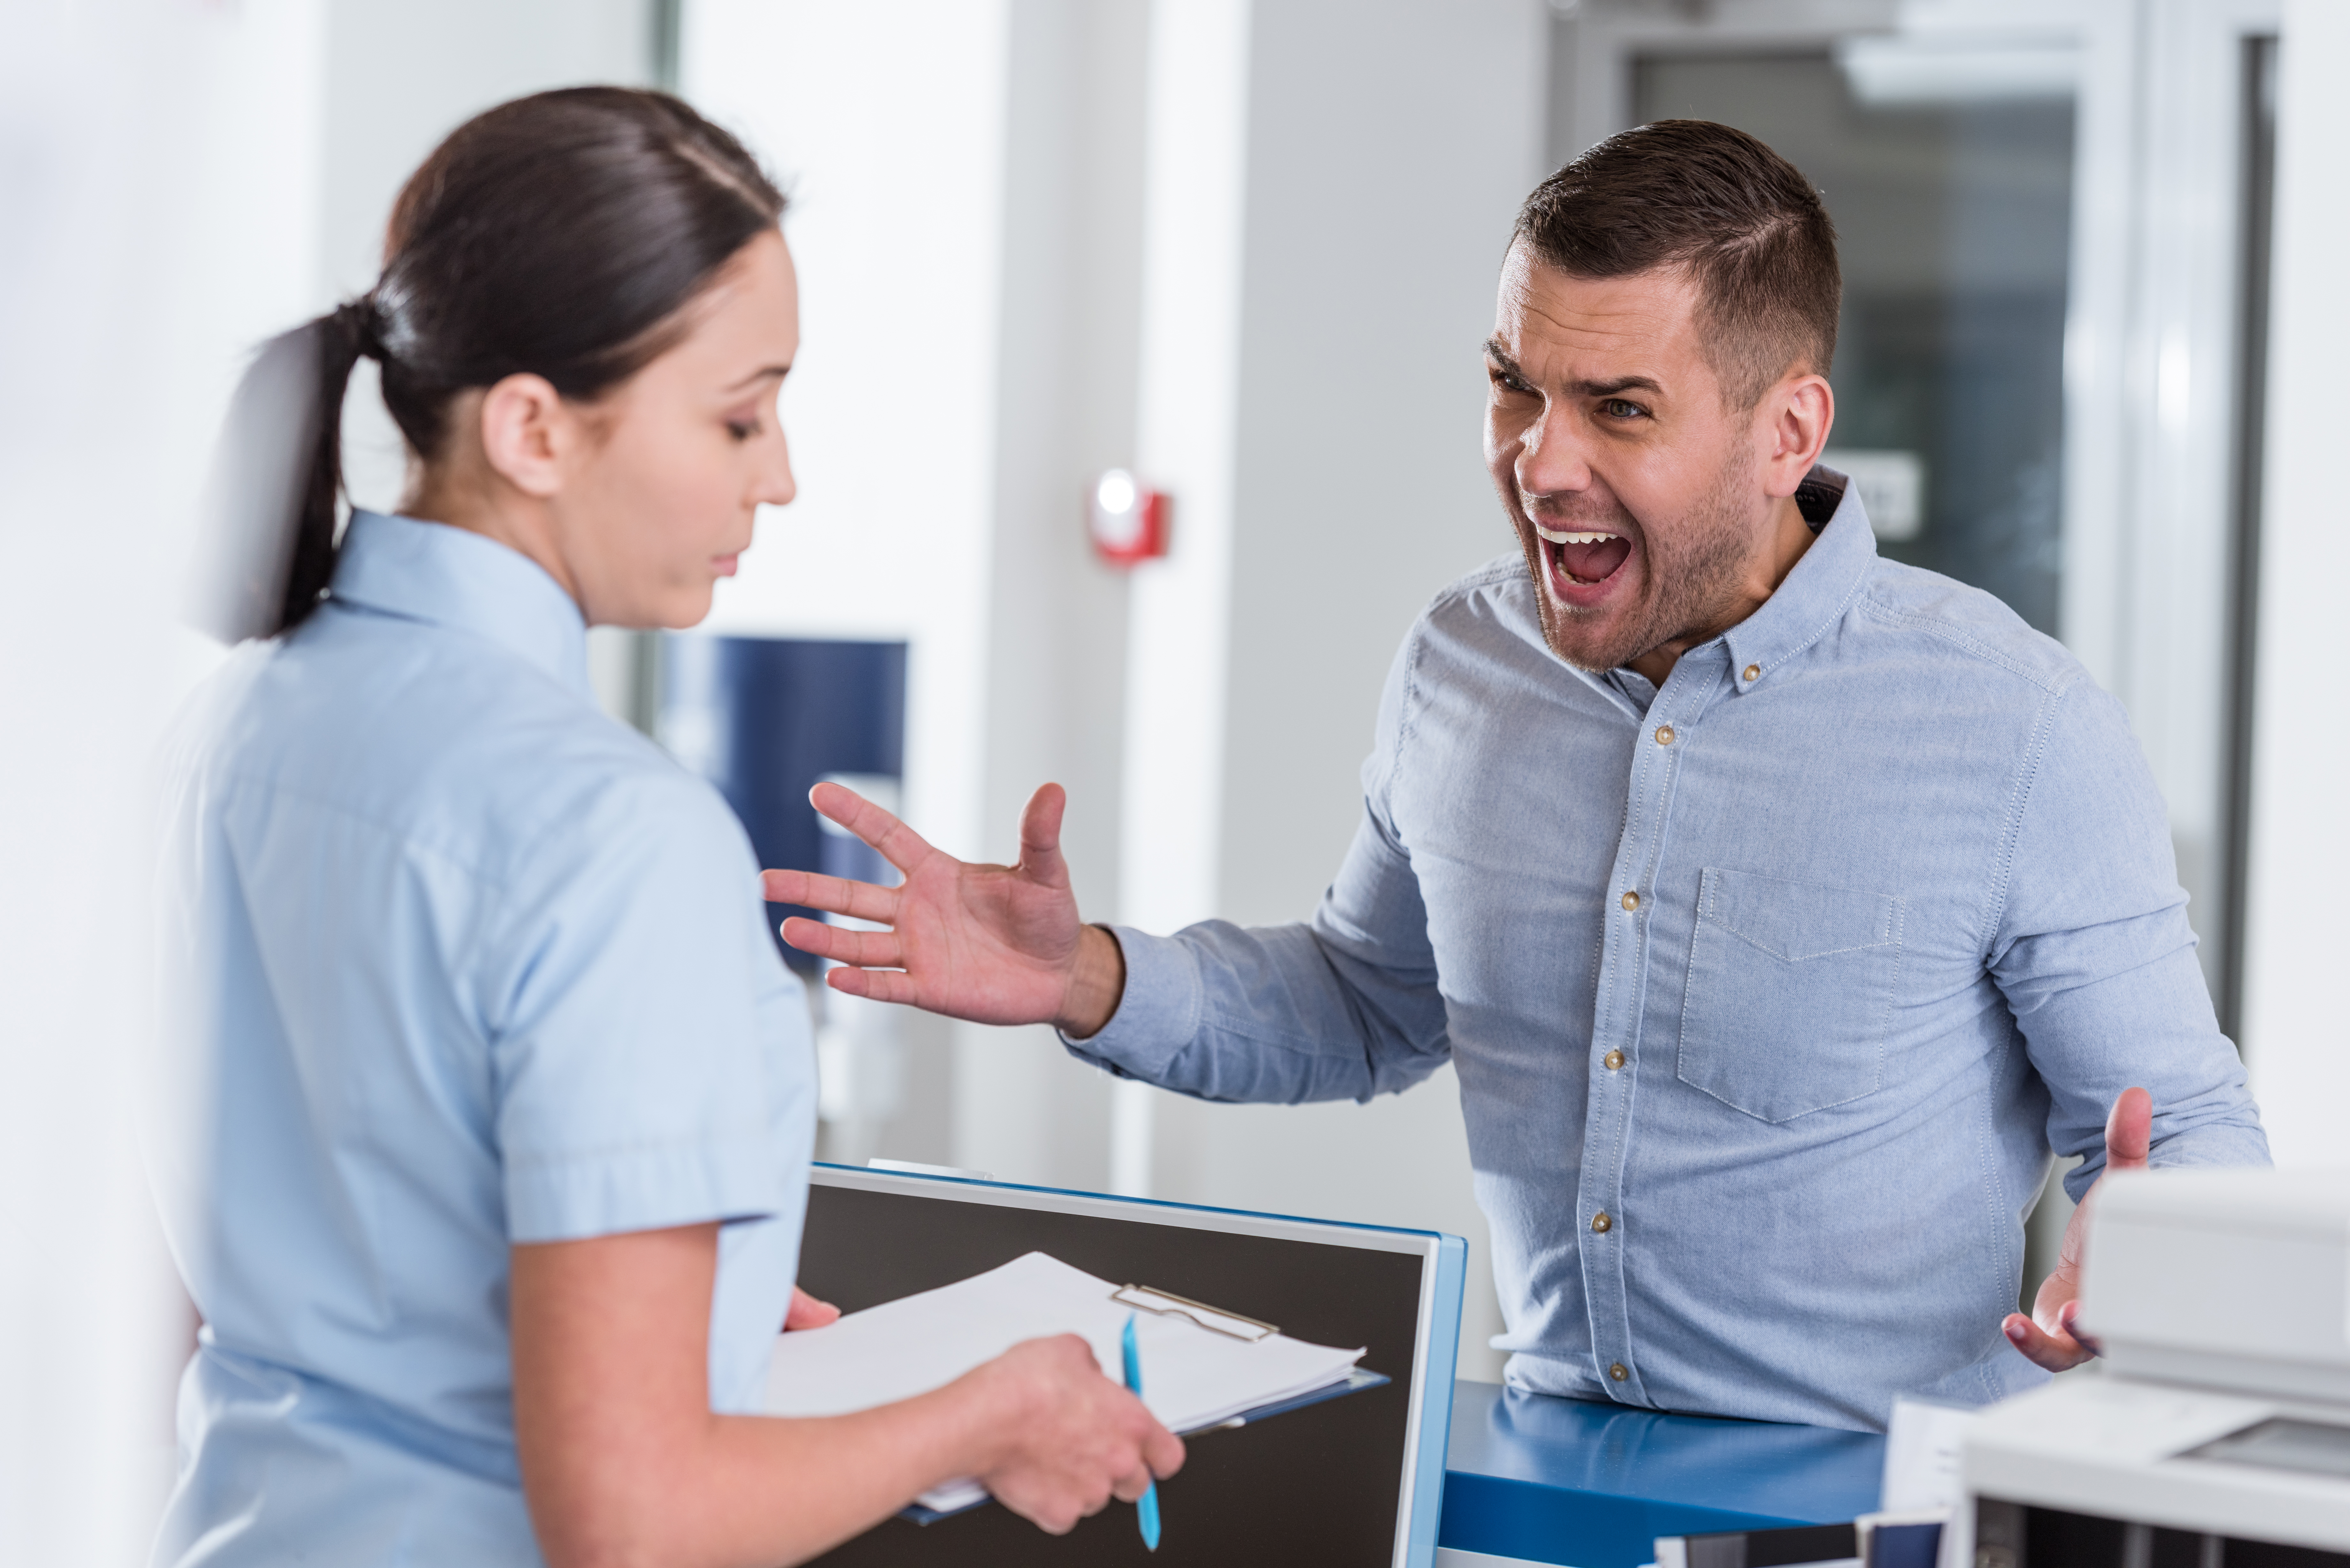 A man screaming at a woman | Source: Shutterstock